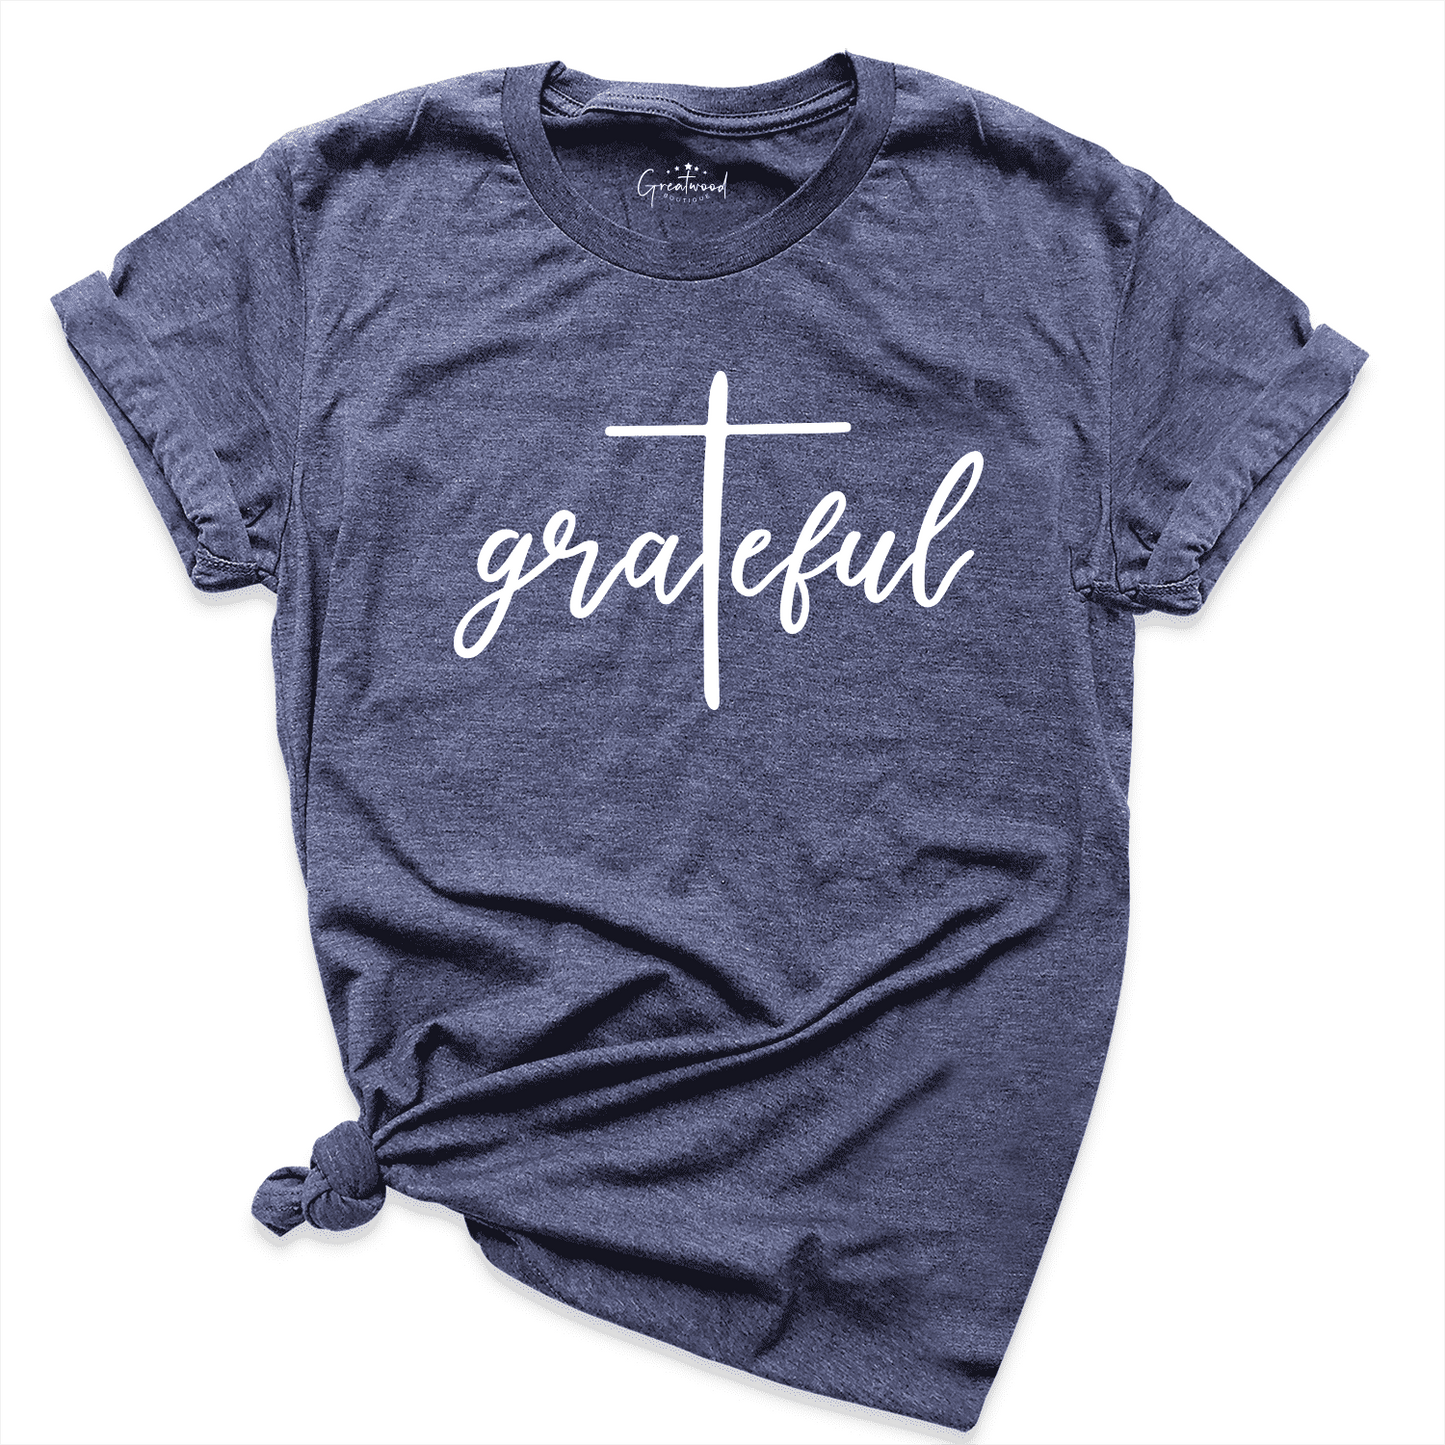 Grateful Christian Shirt Navy - Greatwood Boutique